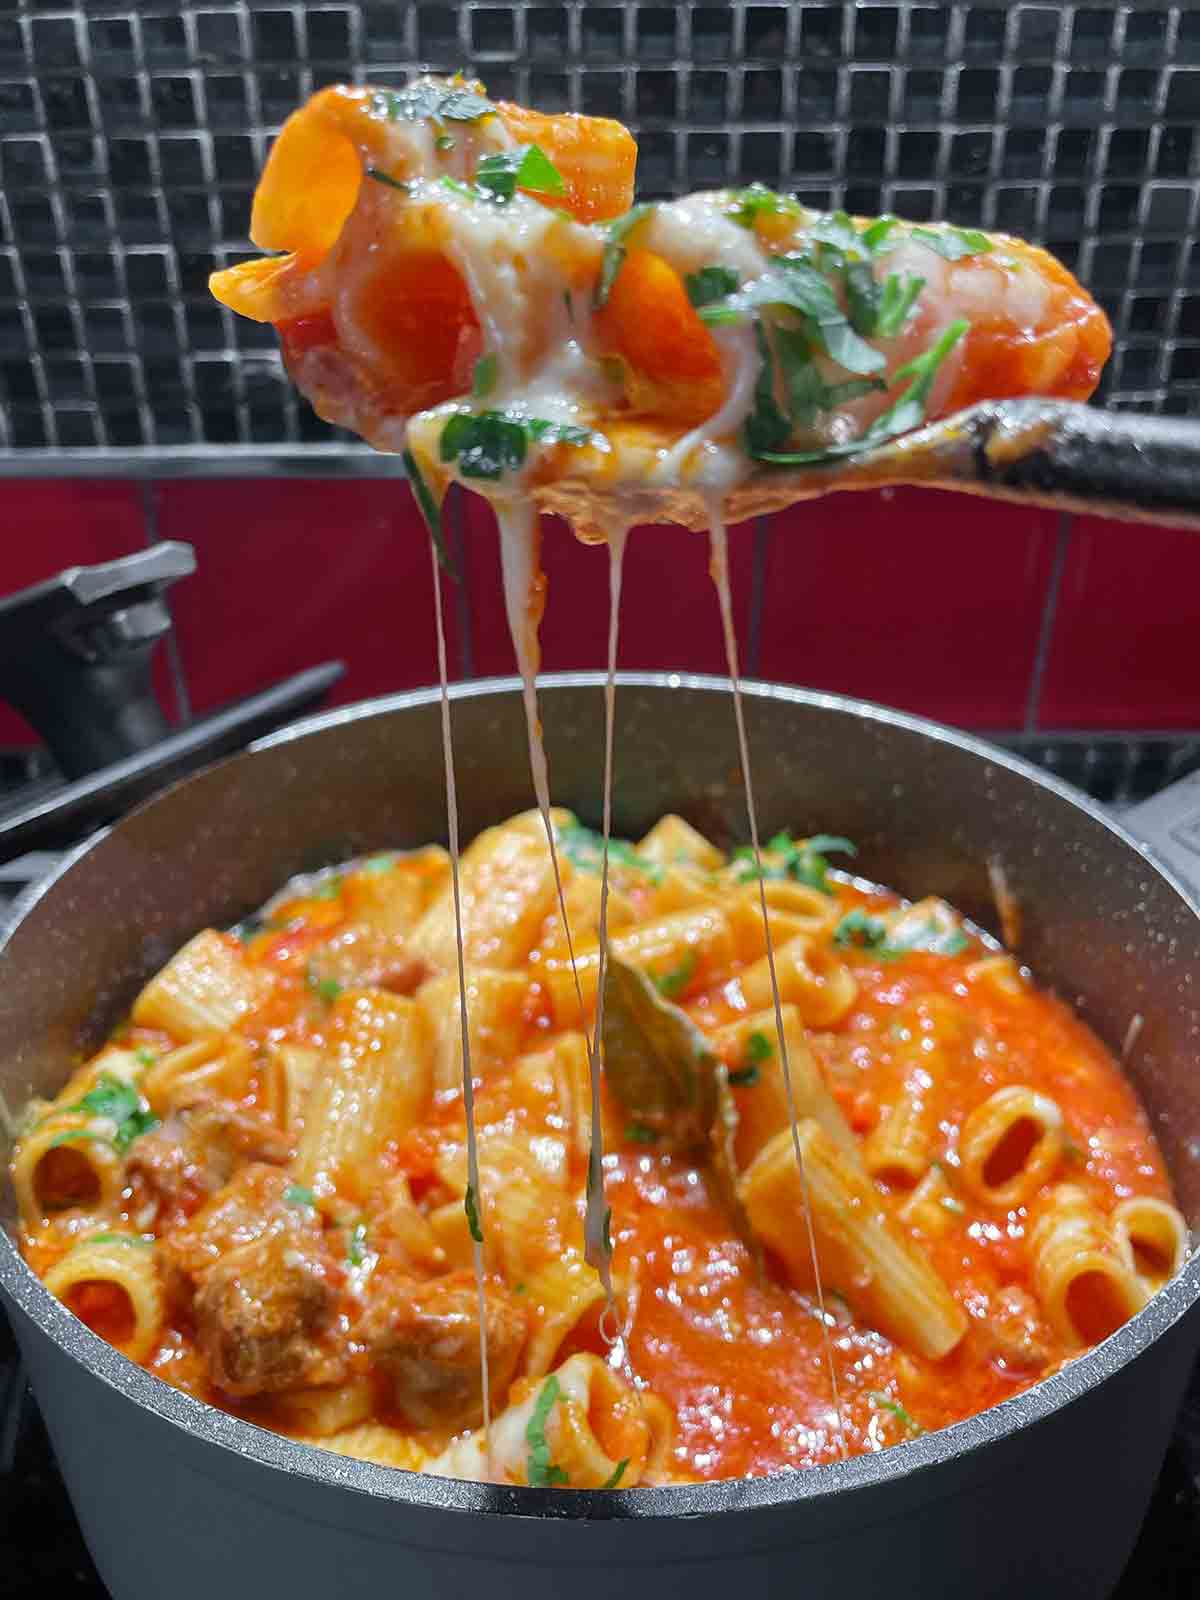 A scoop of pasta and tomato sauce being lifted from a pot.